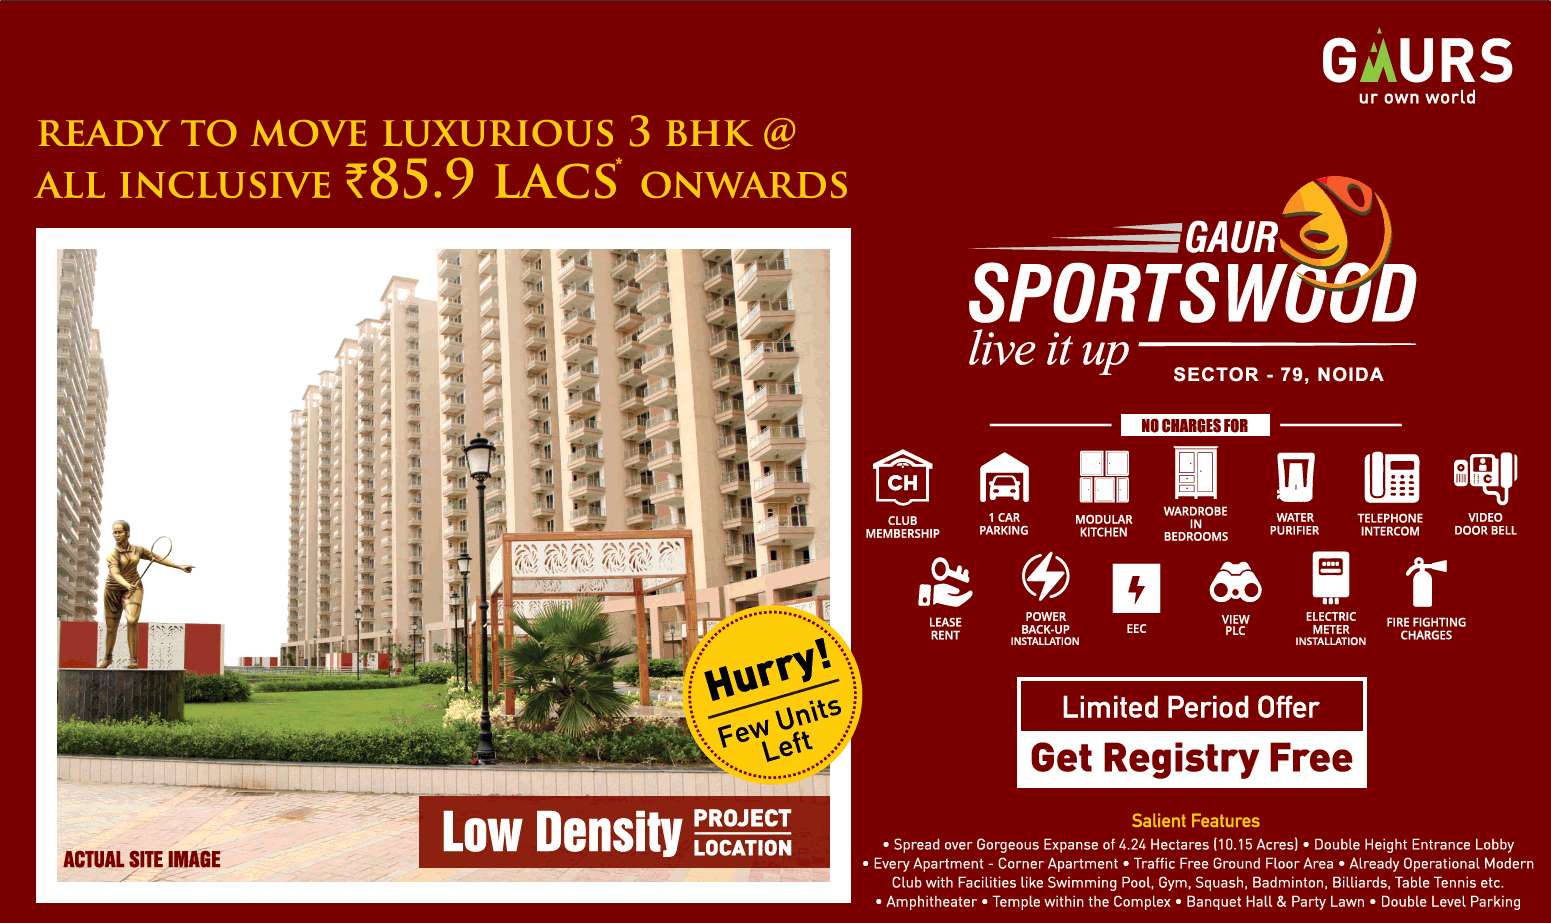 Book ready to move luxurious 3 BHK at Rs 85.9 Lacs at Gaur Sportswood in Sector 79, Noida Update